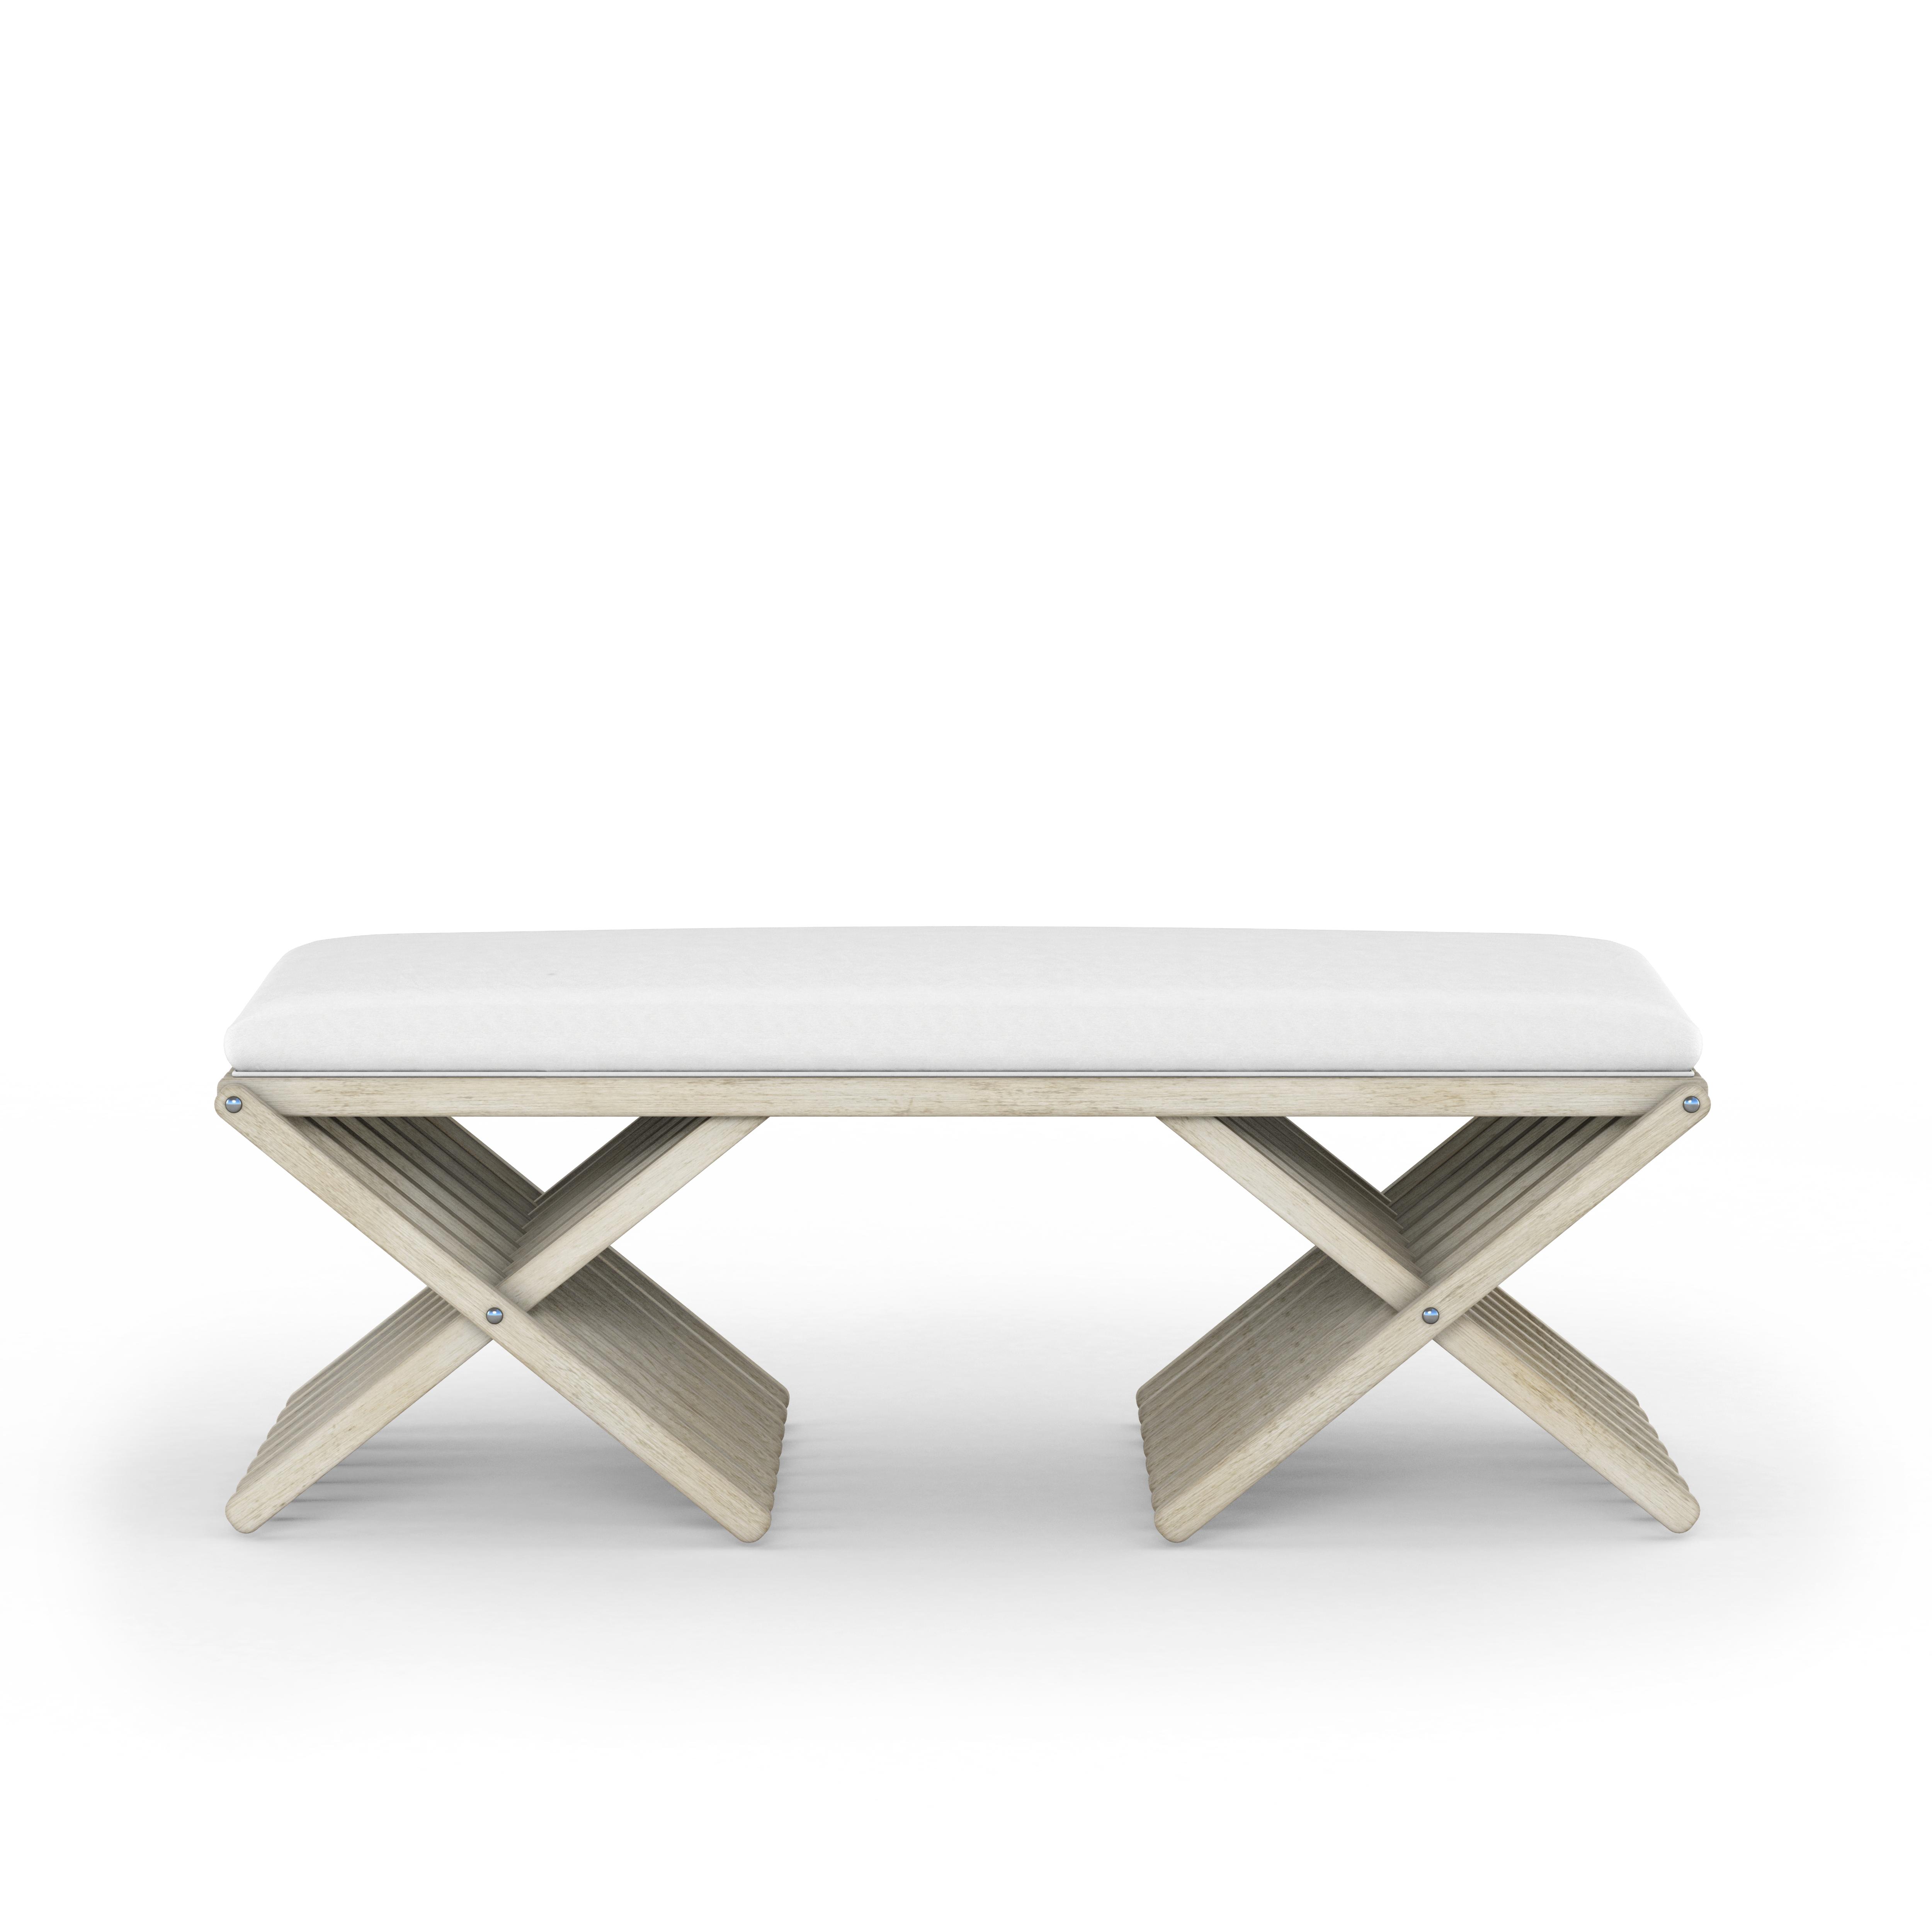 Contemporary Bench Cotiere 299149-2349 in White, Beige Linen